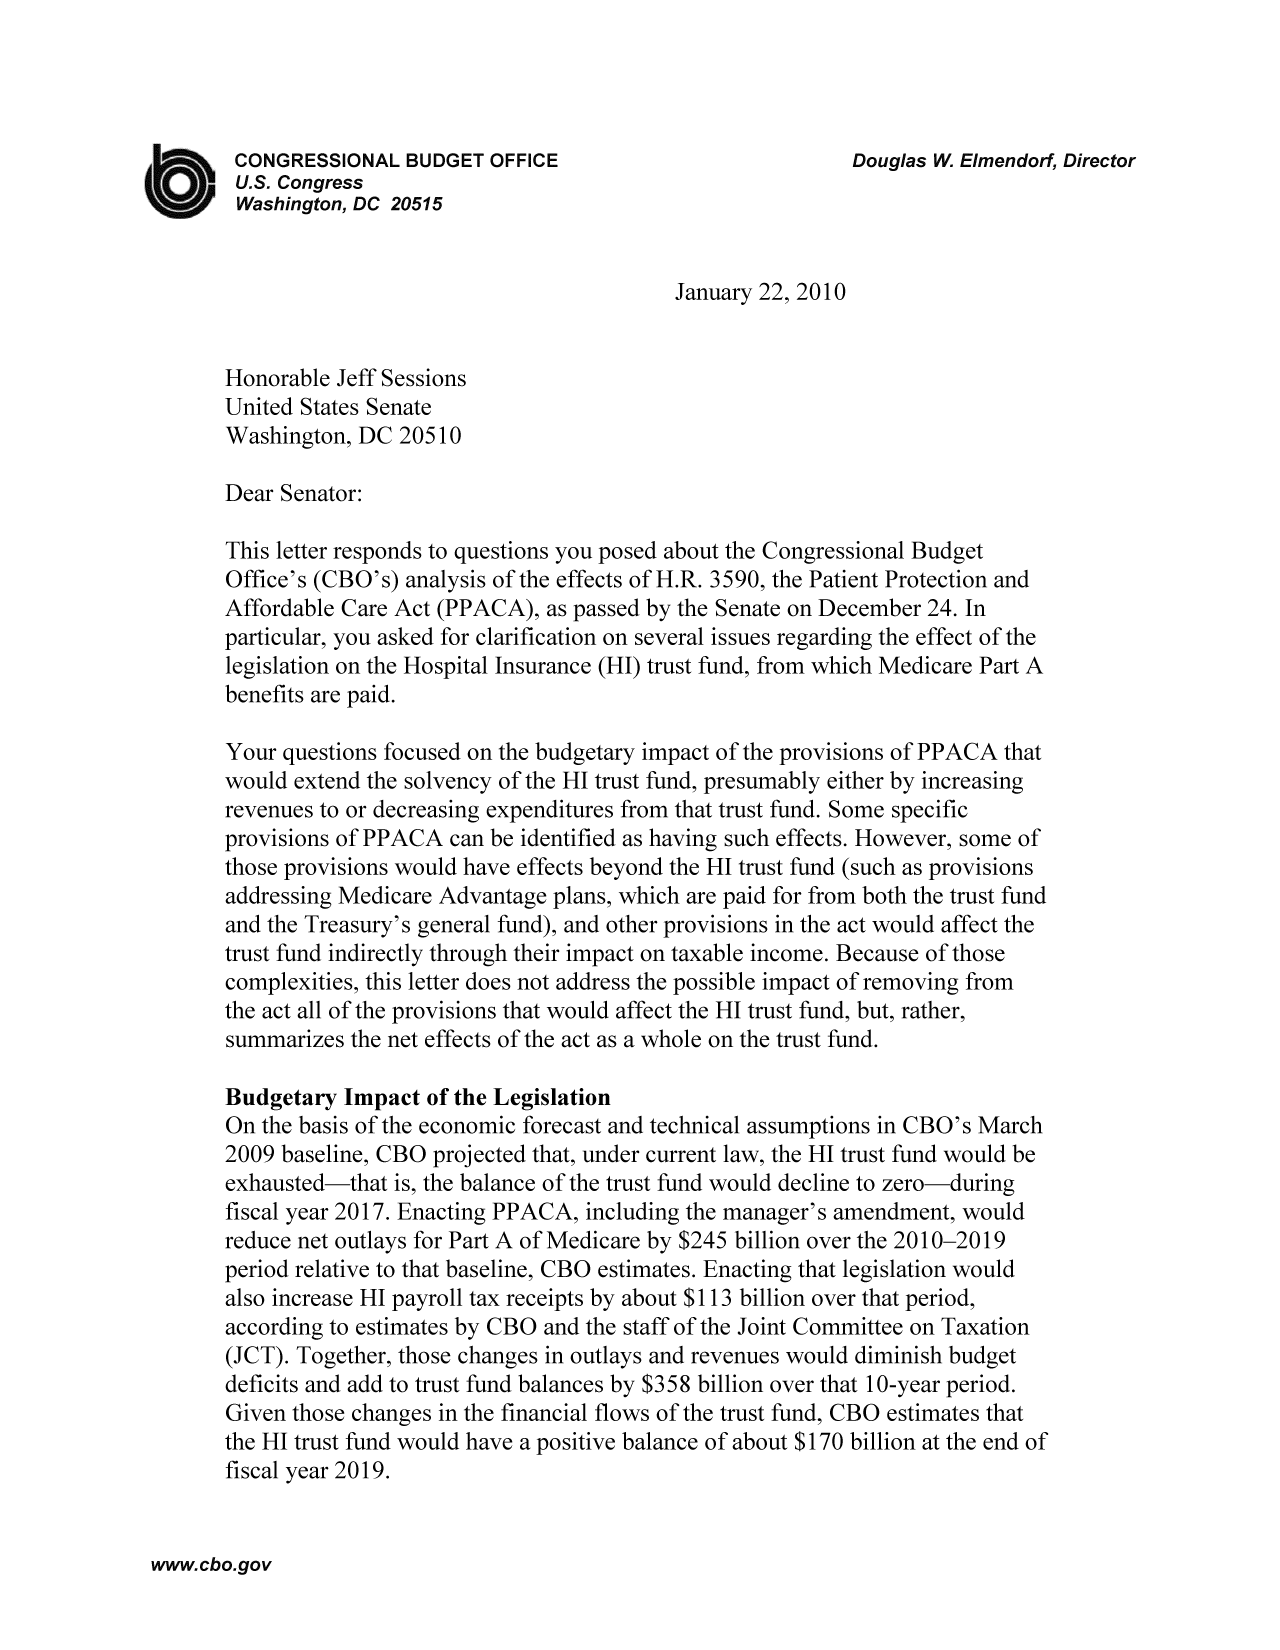 handle is hein.congrec/cbo9378 and id is 1 raw text is: CONGRESSIONAL BUDGET OFFICE                             Douglas W. Elmendorf, Director
U.S. Congress
Washington, DC 20515
January 22, 2010
Honorable Jeff Sessions
United States Senate
Washington, DC 20510
Dear Senator:
This letter responds to questions you posed about the Congressional Budget
Office's (CBO's) analysis of the effects of H.R. 3590, the Patient Protection and
Affordable Care Act (PPACA), as passed by the Senate on December 24. In
particular, you asked for clarification on several issues regarding the effect of the
legislation on the Hospital Insurance (HI) trust fund, from which Medicare Part A
benefits are paid.
Your questions focused on the budgetary impact of the provisions of PPACA that
would extend the solvency of the HI trust fund, presumably either by increasing
revenues to or decreasing expenditures from that trust fund. Some specific
provisions of PPACA can be identified as having such effects. However, some of
those provisions would have effects beyond the HI trust fund (such as provisions
addressing Medicare Advantage plans, which are paid for from both the trust fund
and the Treasury's general fund), and other provisions in the act would affect the
trust fund indirectly through their impact on taxable income. Because of those
complexities, this letter does not address the possible impact of removing from
the act all of the provisions that would affect the HI trust fund, but, rather,
summarizes the net effects of the act as a whole on the trust fund.
Budgetary Impact of the Legislation
On the basis of the economic forecast and technical assumptions in CBO's March
2009 baseline, CBO projected that, under current law, the HI trust fund would be
exhausted-that is, the balance of the trust fund would decline to zero-during
fiscal year 2017. Enacting PPACA, including the manager's amendment, would
reduce net outlays for Part A of Medicare by $245 billion over the 2010-2019
period relative to that baseline, CBO estimates. Enacting that legislation would
also increase HI payroll tax receipts by about $113 billion over that period,
according to estimates by CBO and the staff of the Joint Committee on Taxation
(JCT). Together, those changes in outlays and revenues would diminish budget
deficits and add to trust fund balances by $358 billion over that 10-year period.
Given those changes in the financial flows of the trust fund, CBO estimates that
the HI trust fund would have a positive balance of about $170 billion at the end of
fiscal year 2019.

www.cbo.gov


